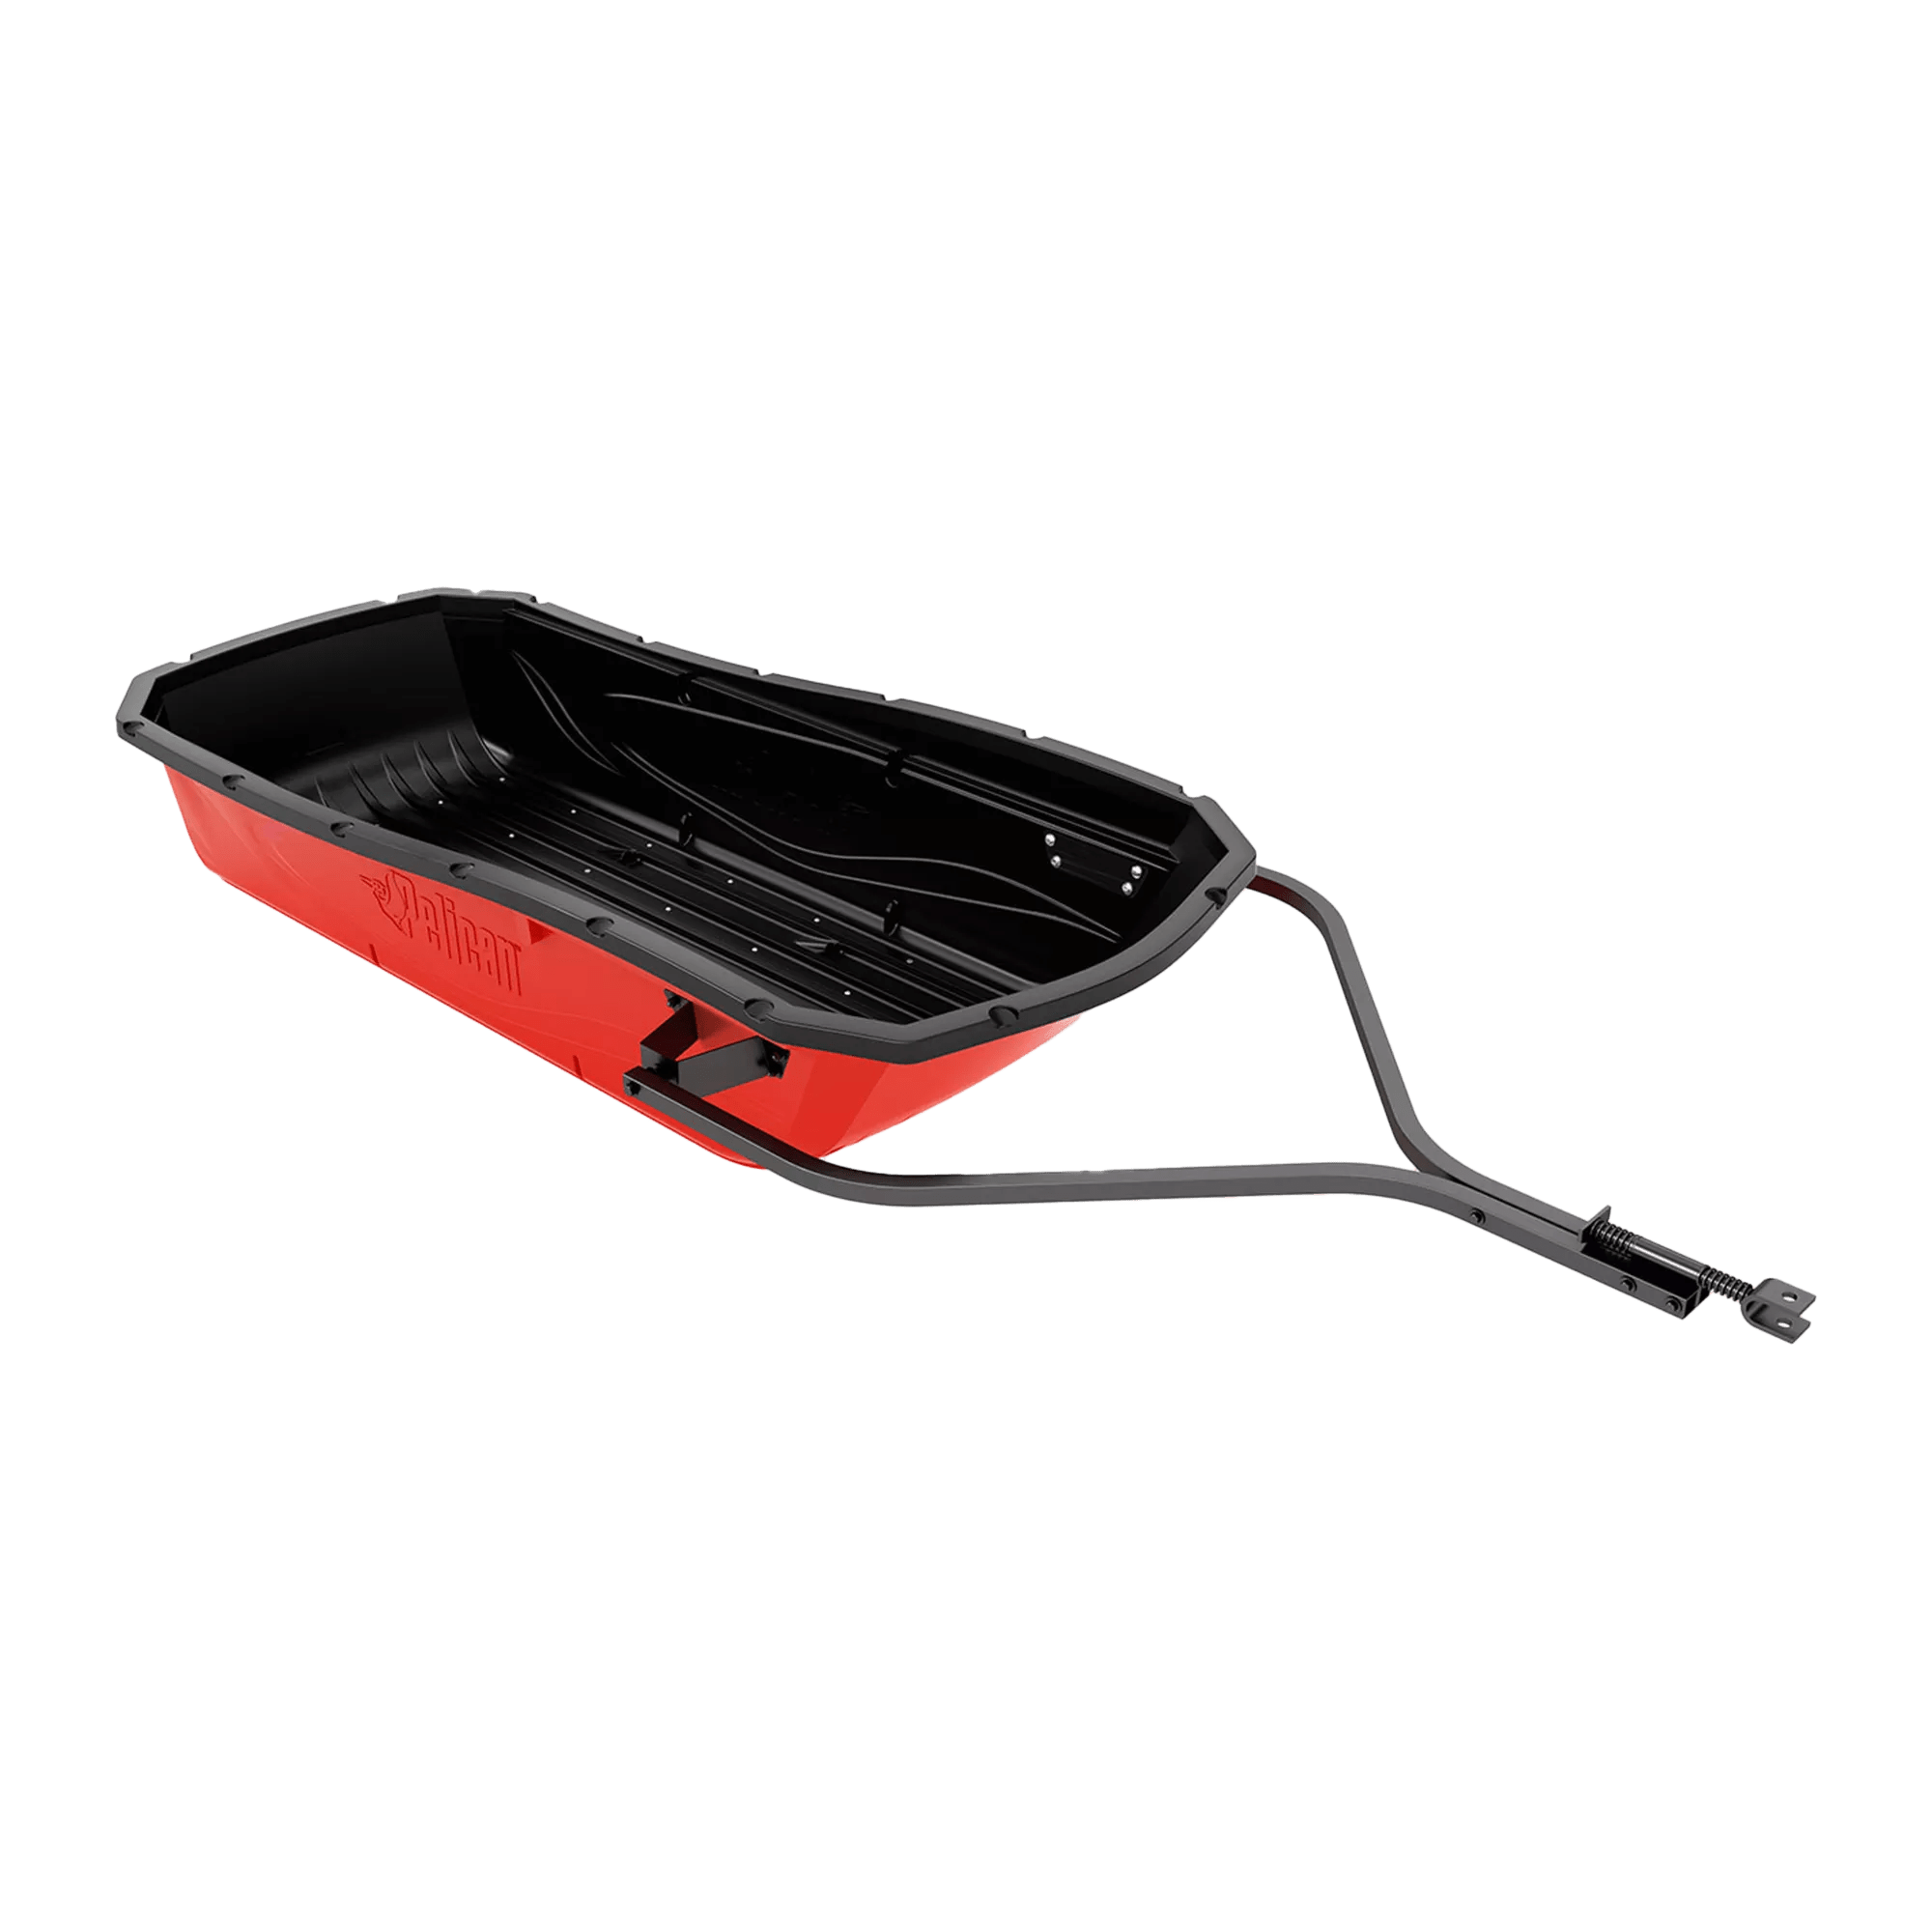 PELICAN - Trek Sport 82 Utility Sled with Runners, Tow Hitch & Travel Cover - Red - LHT82PB01-00 - ISO 